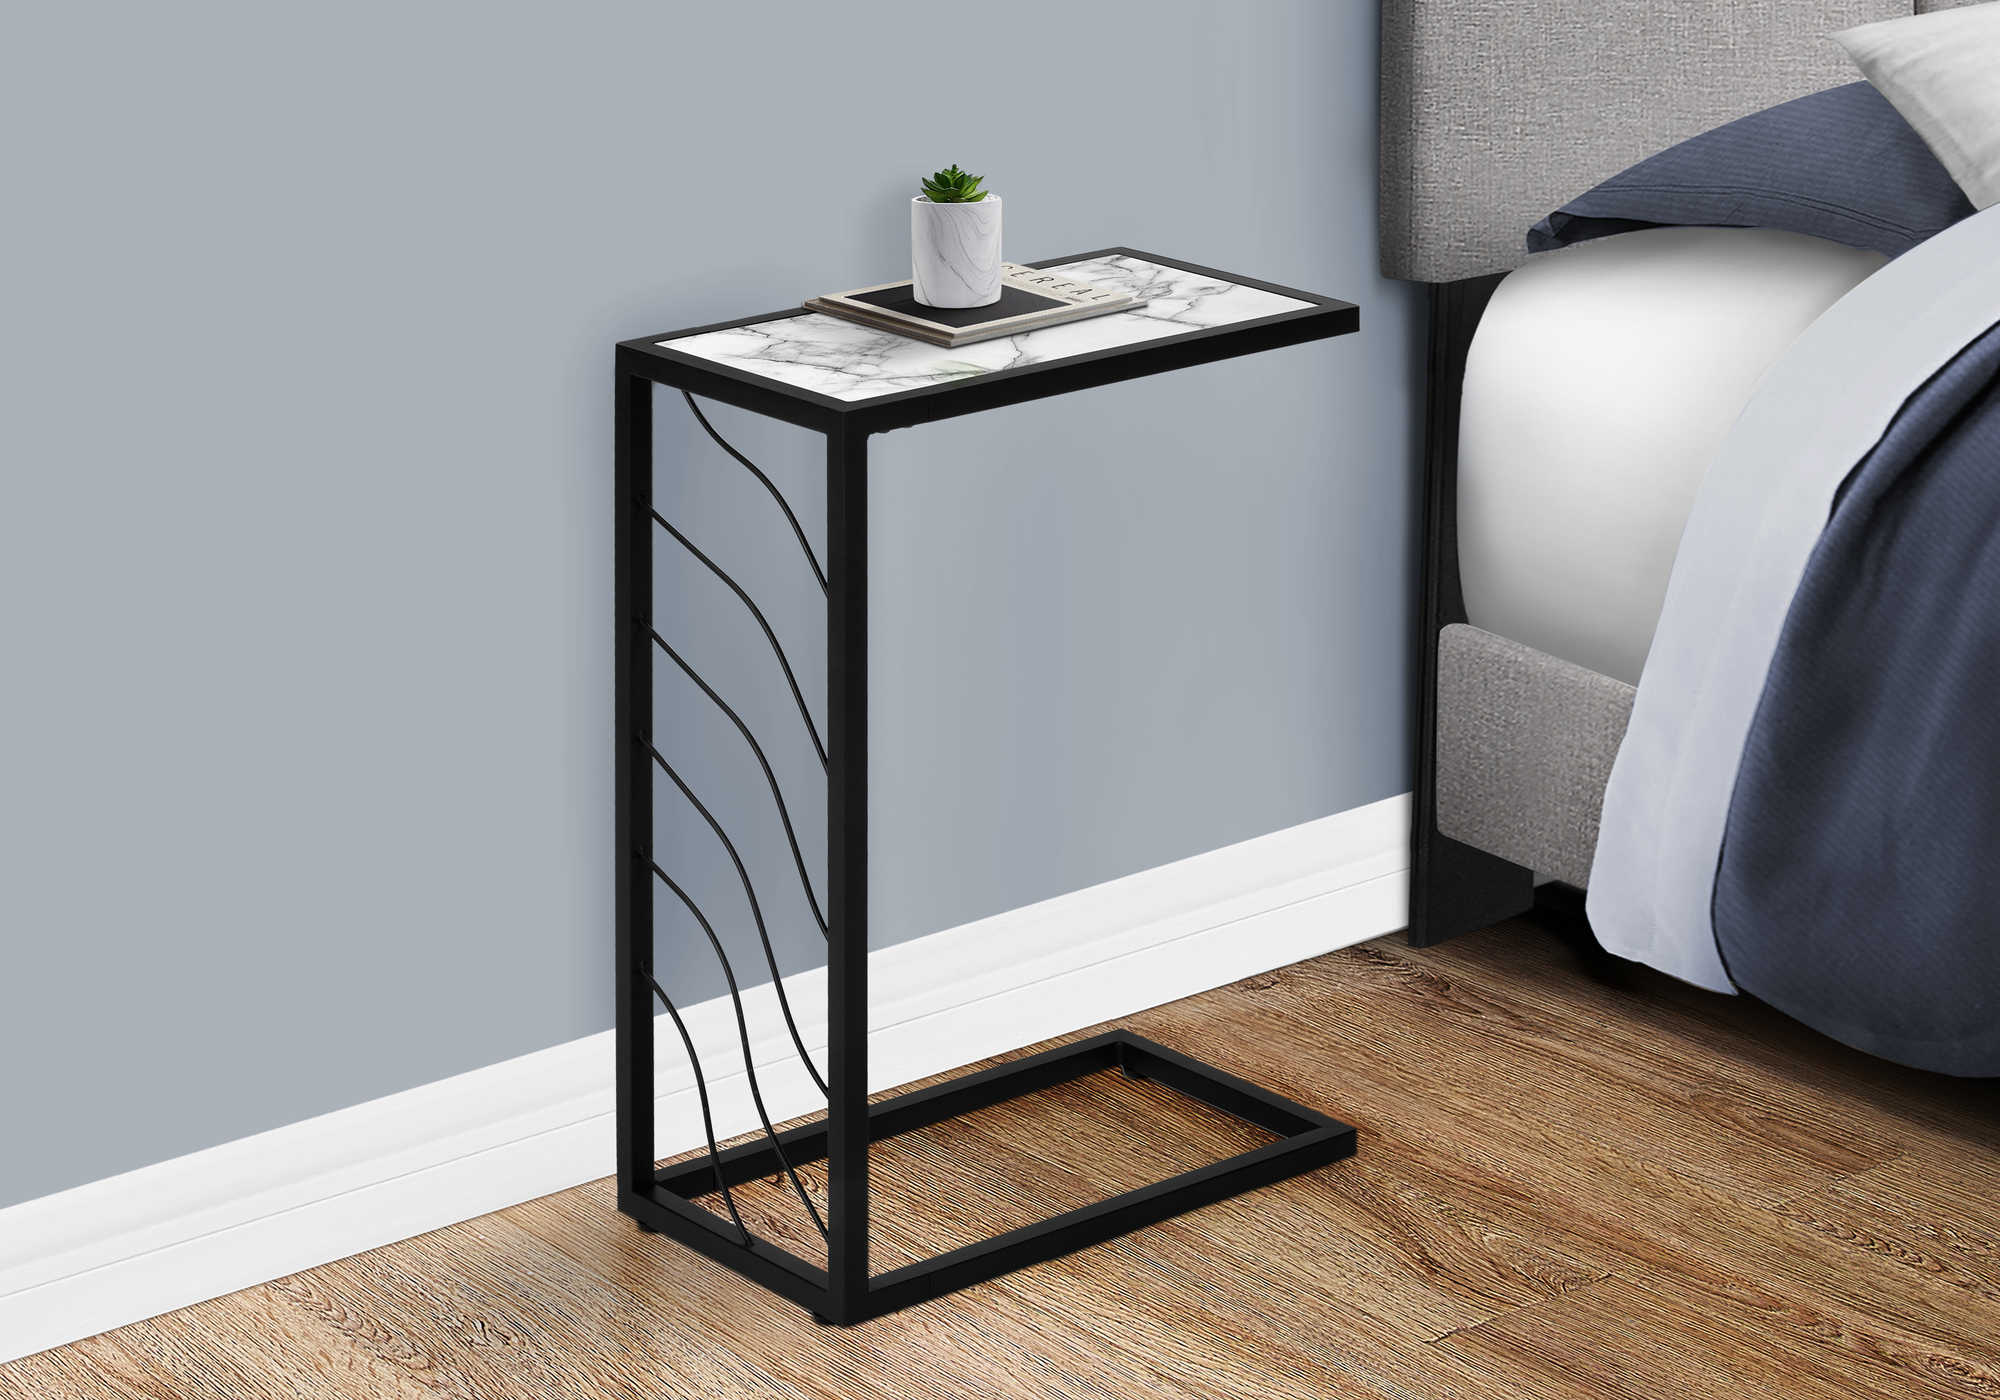 BEDROOM ACCENT TABLE - 25"H / WHITE MARBLE-LOOK / BLACK METAL